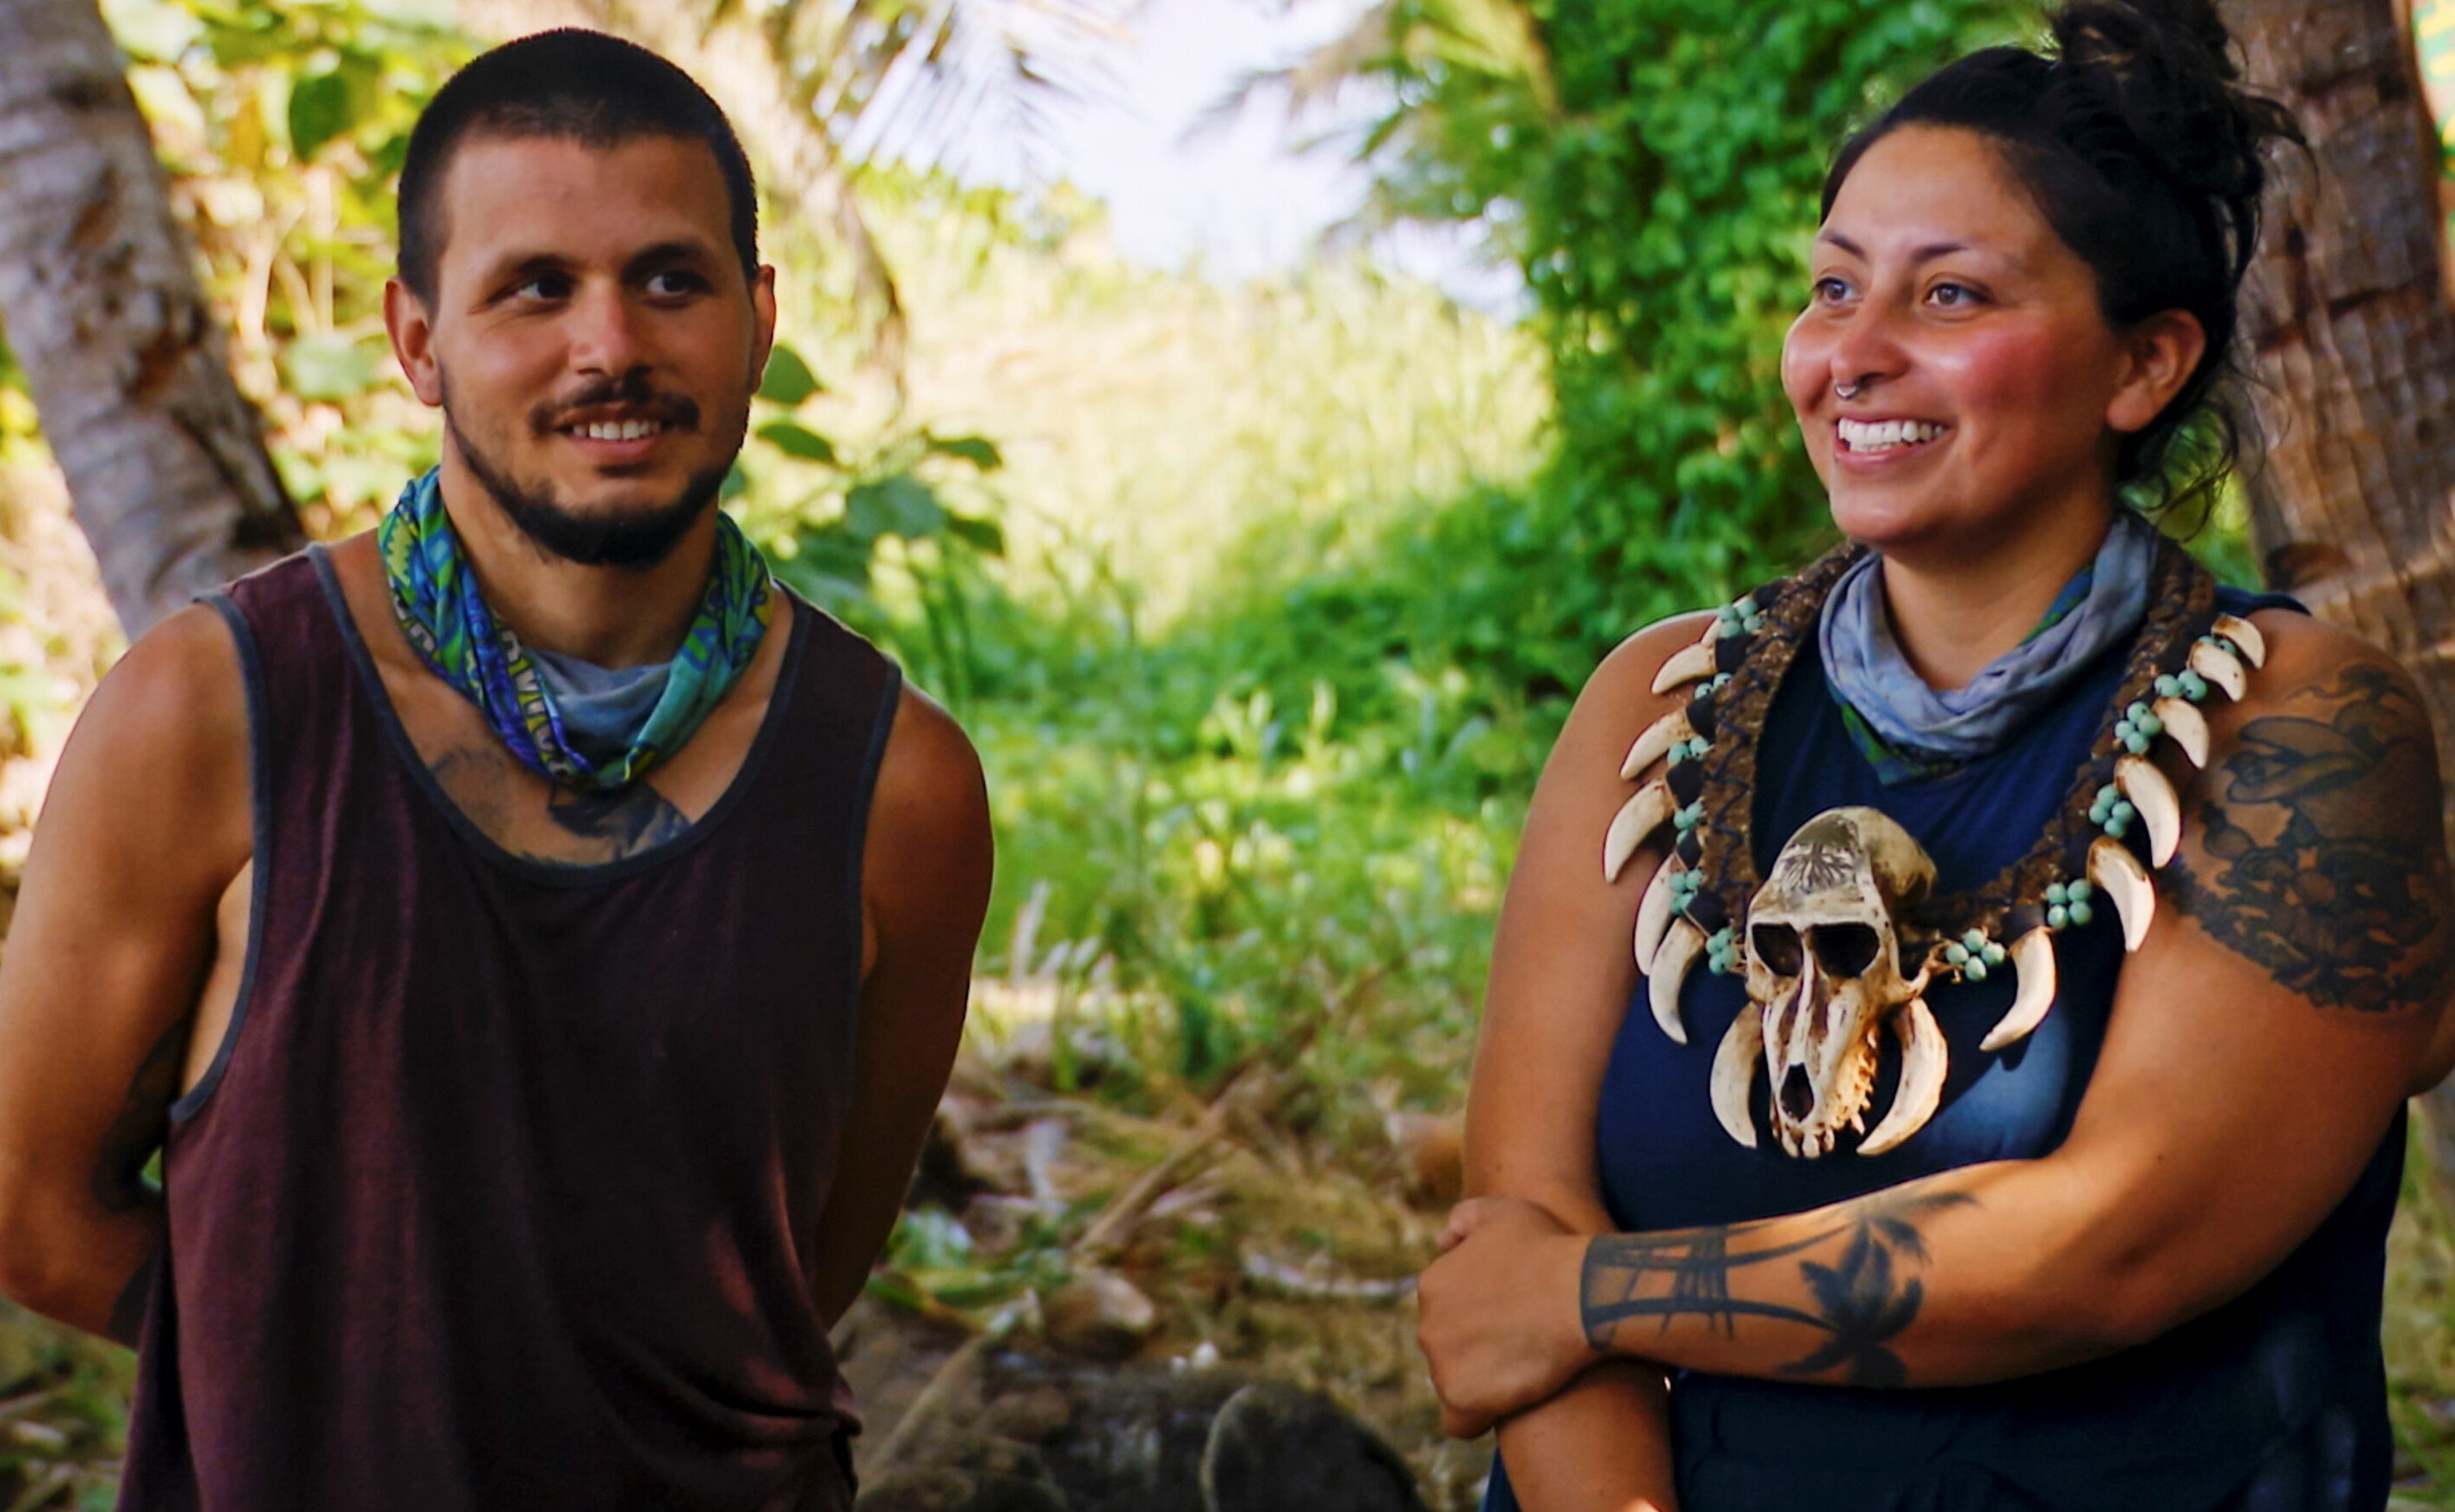 Jesse Lopez and Karla Cruz Godoy, who, according to 'Survivor' spoilers, may be headed home in the next season 43 episode, converse at camp. Jesse wears a dark red tank top and his light blue 'Survivor' buff around his neck. Karla wears a dark blue tank top, her light blue 'Survivor' buff around her neck, and the immunity necklace.